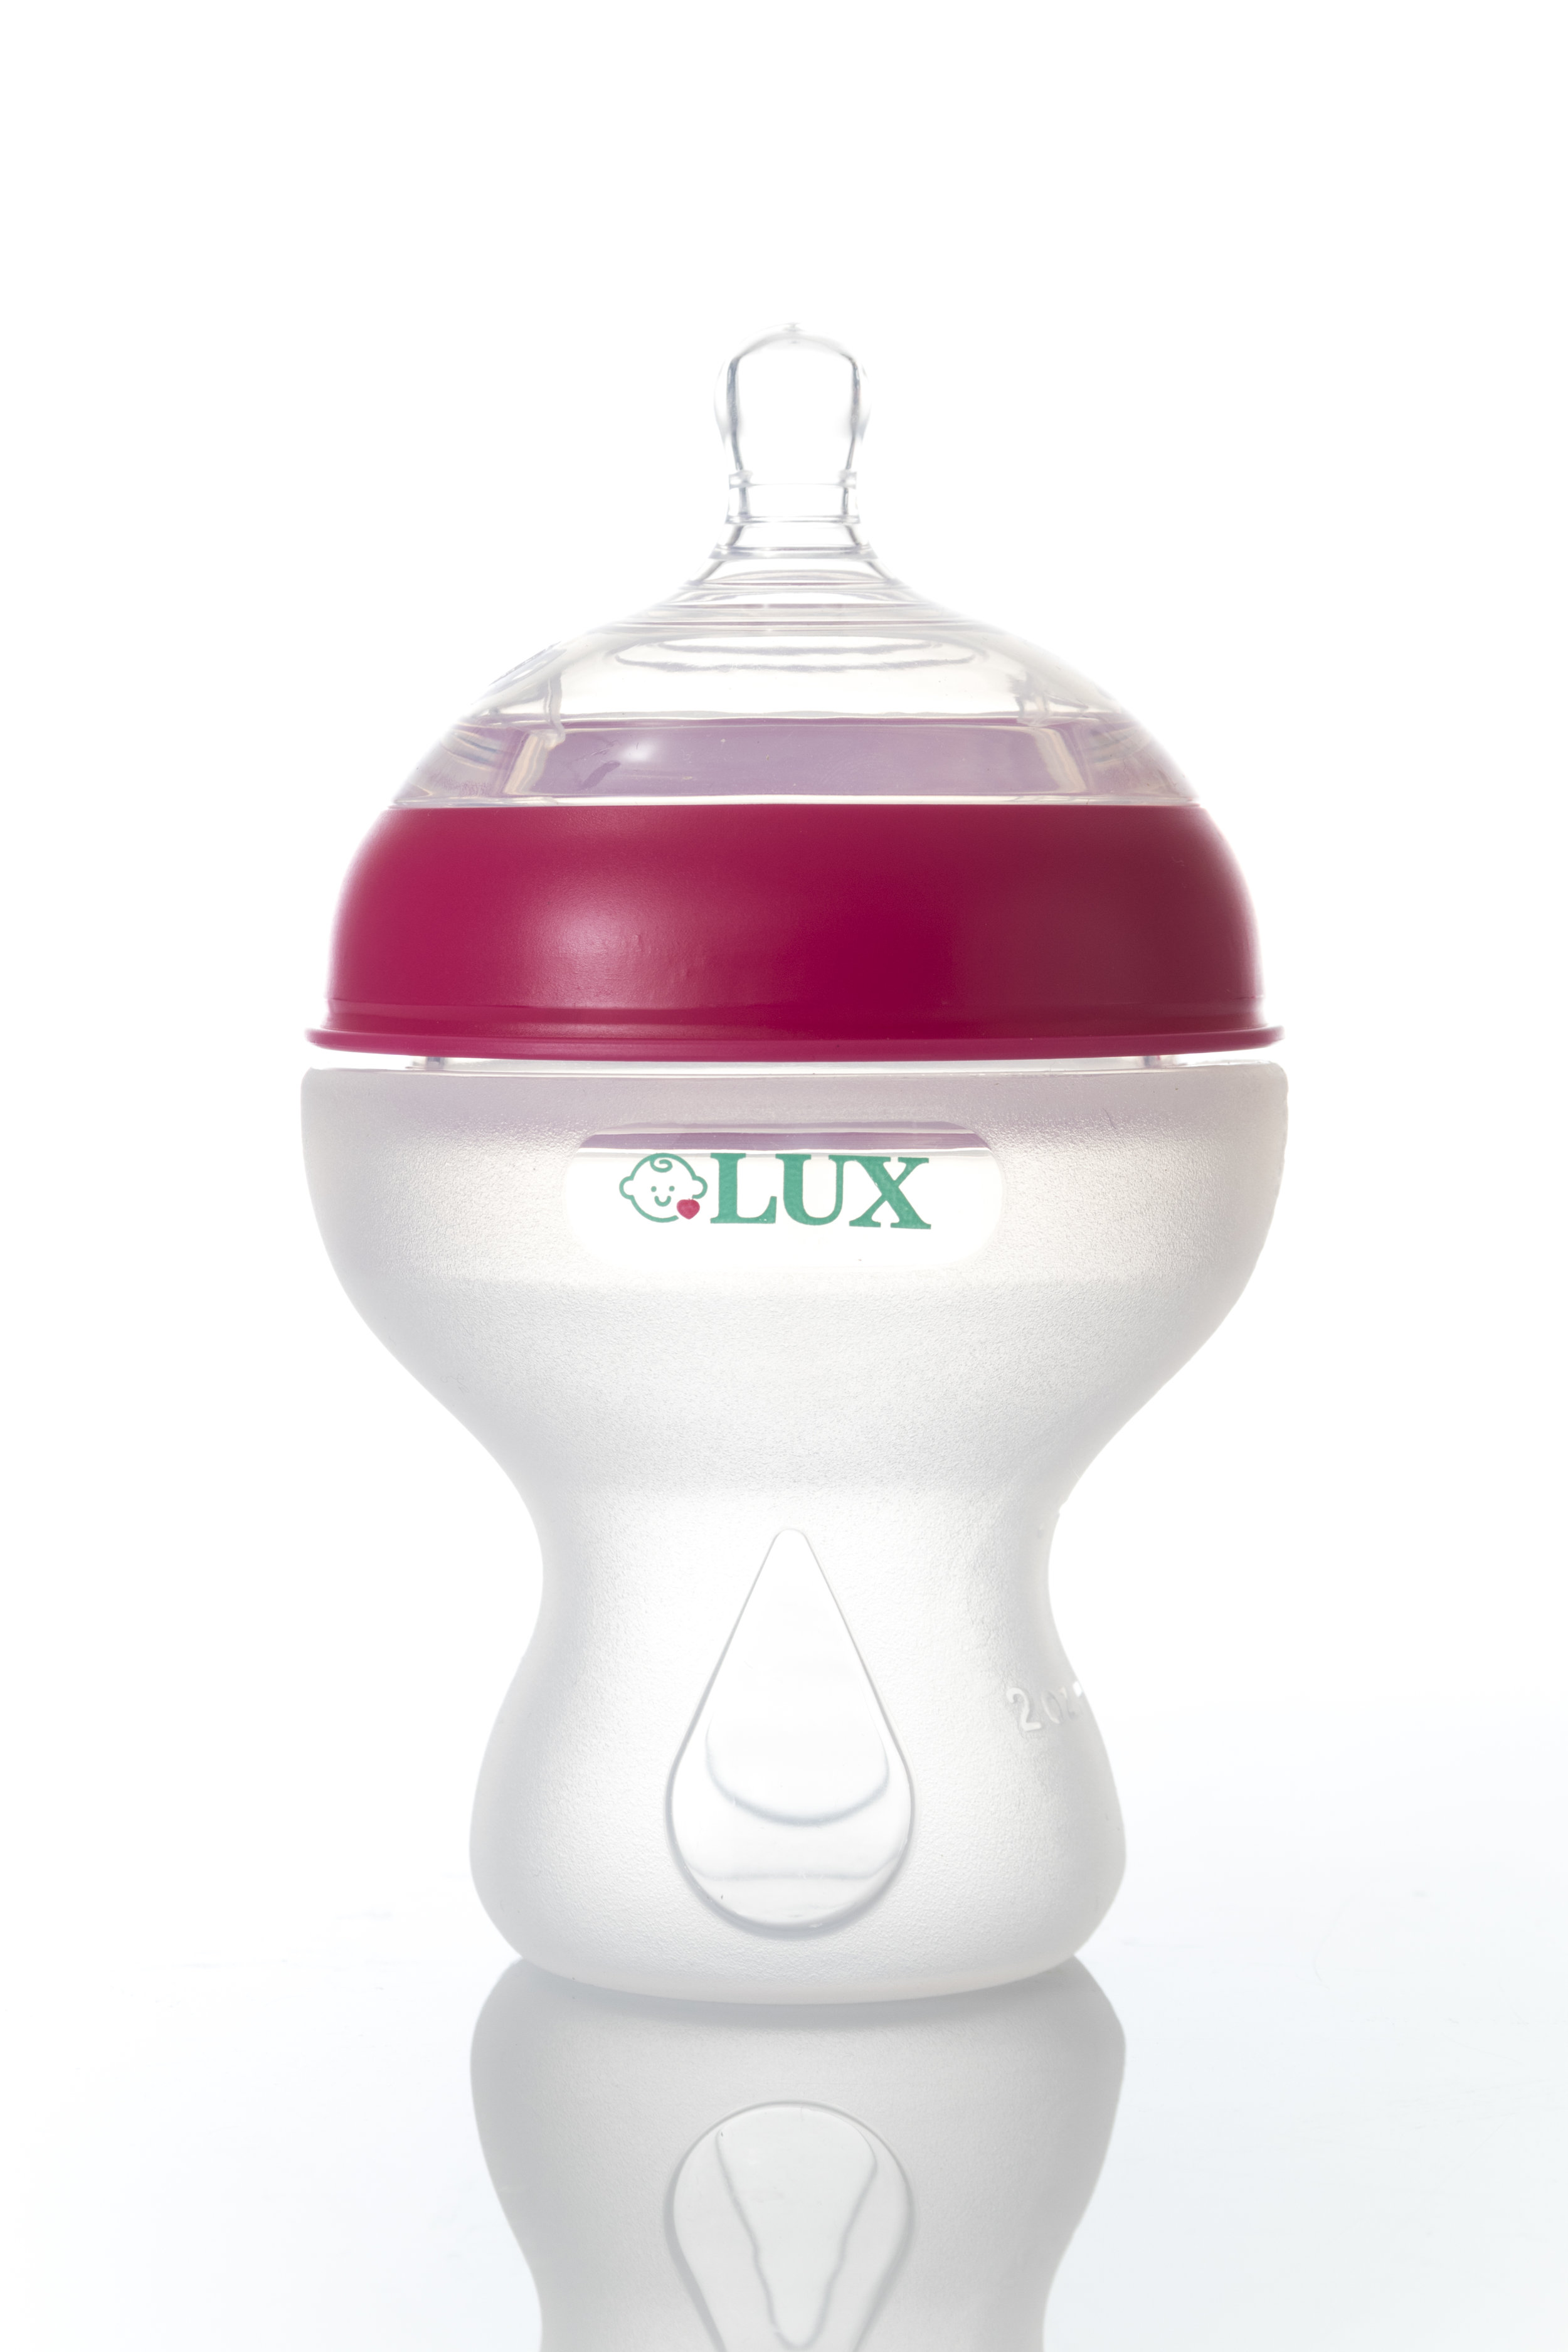 LUX Big Boob Baby Bottle (9 oz)-Hot Pink picture